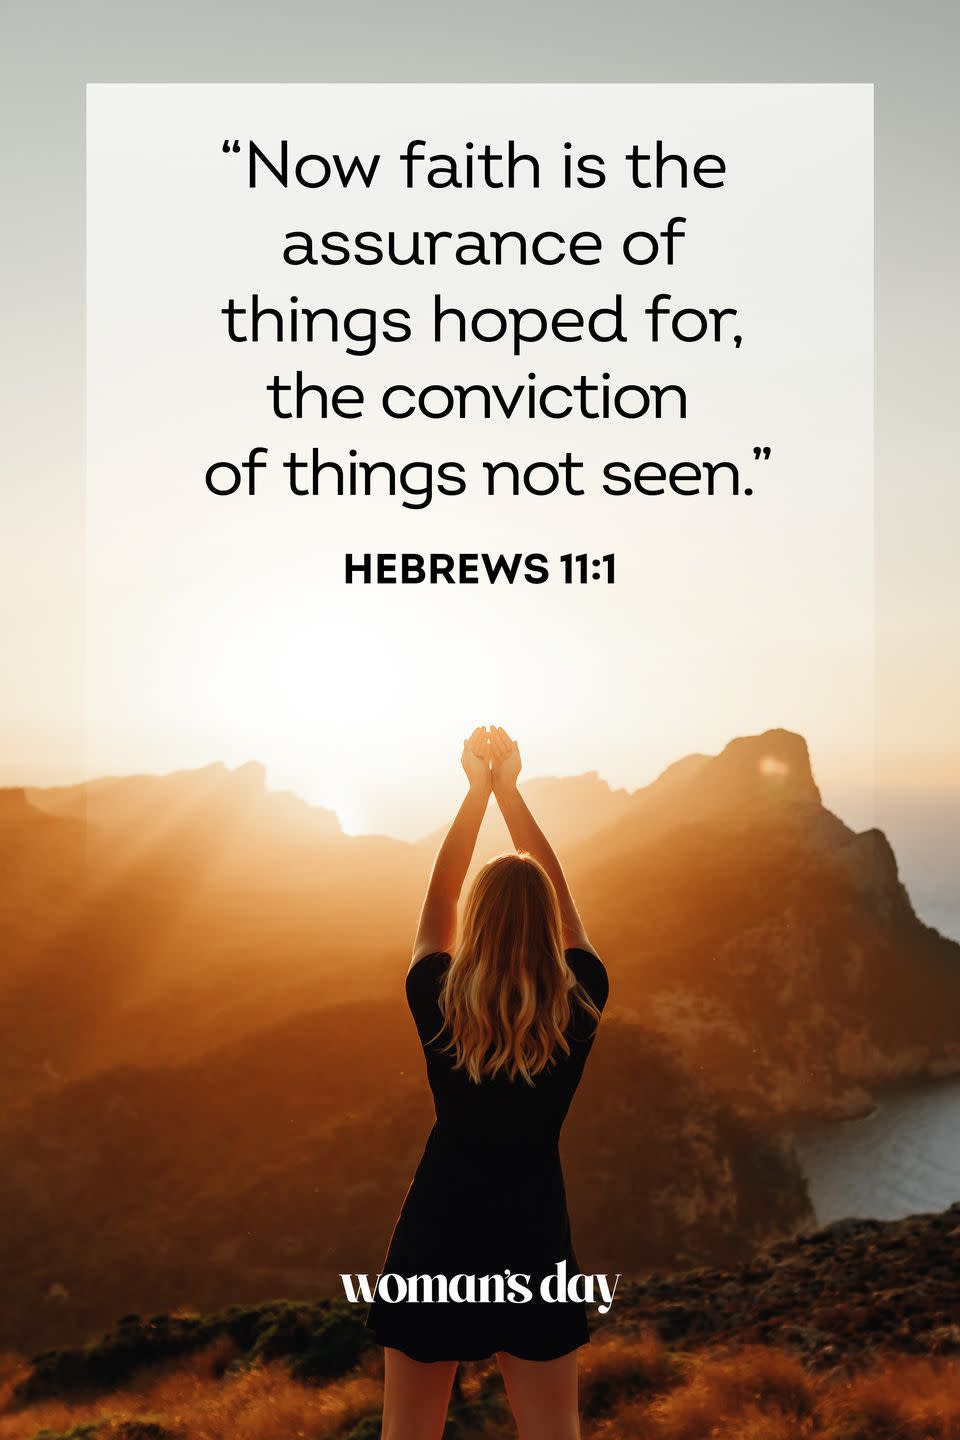 <p>“Now faith is the assurance of things hoped for, the conviction of things not seen.”</p><p><strong>The Good News:</strong> Keeping faith means having trust that your spirituality may not always be acknowledged in visible ways — but that doesn’t mean that God is not watching.</p>